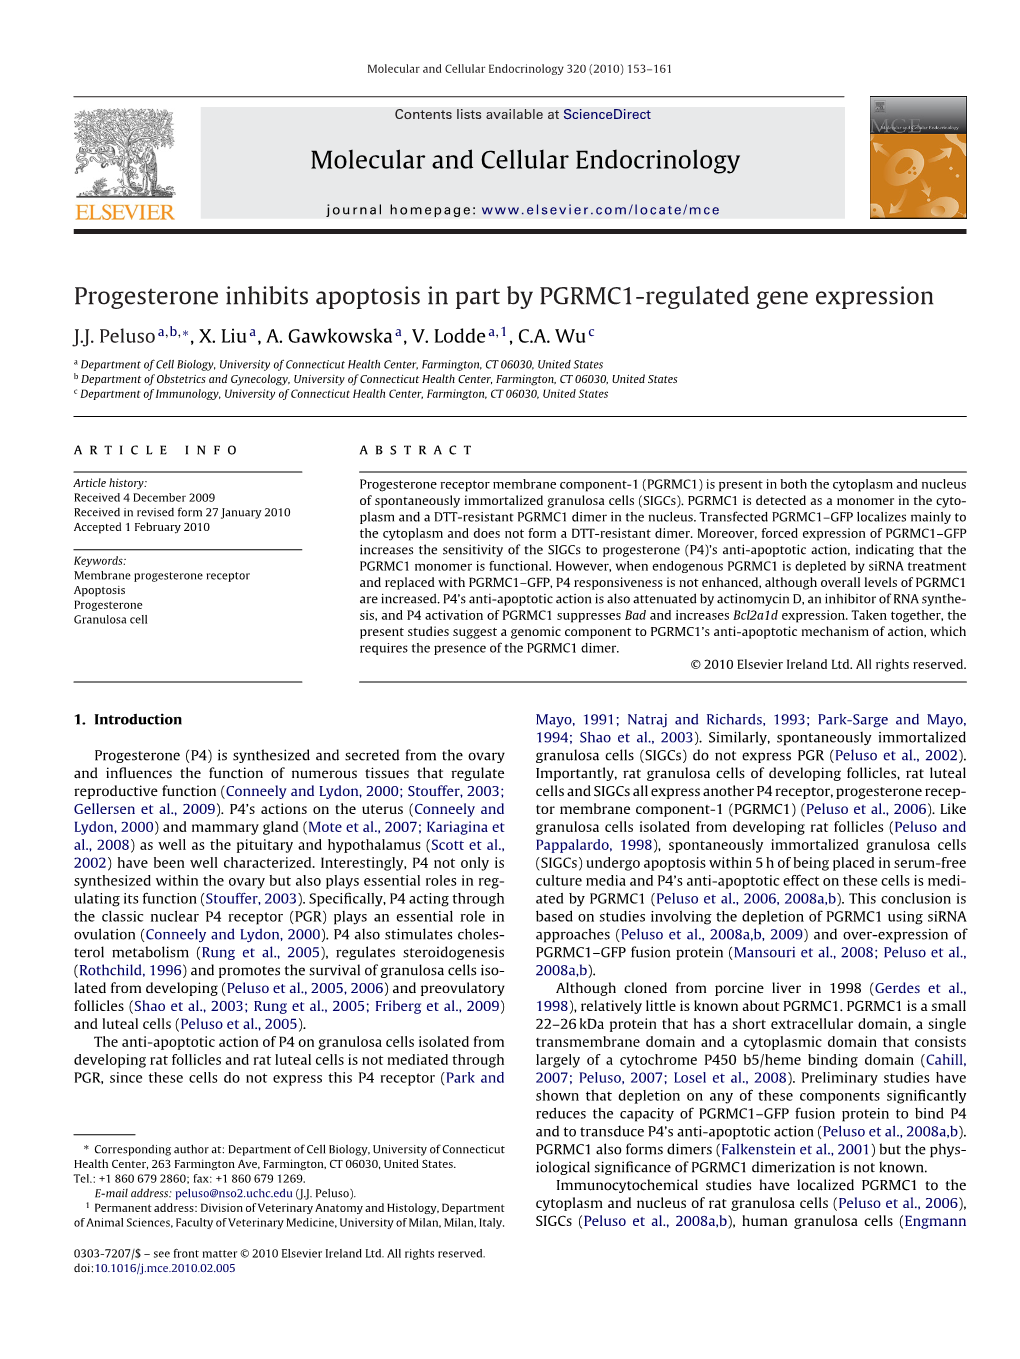 Progesterone Inhibits Apoptosis in Part by PGRMC1-Regulated Gene Expression